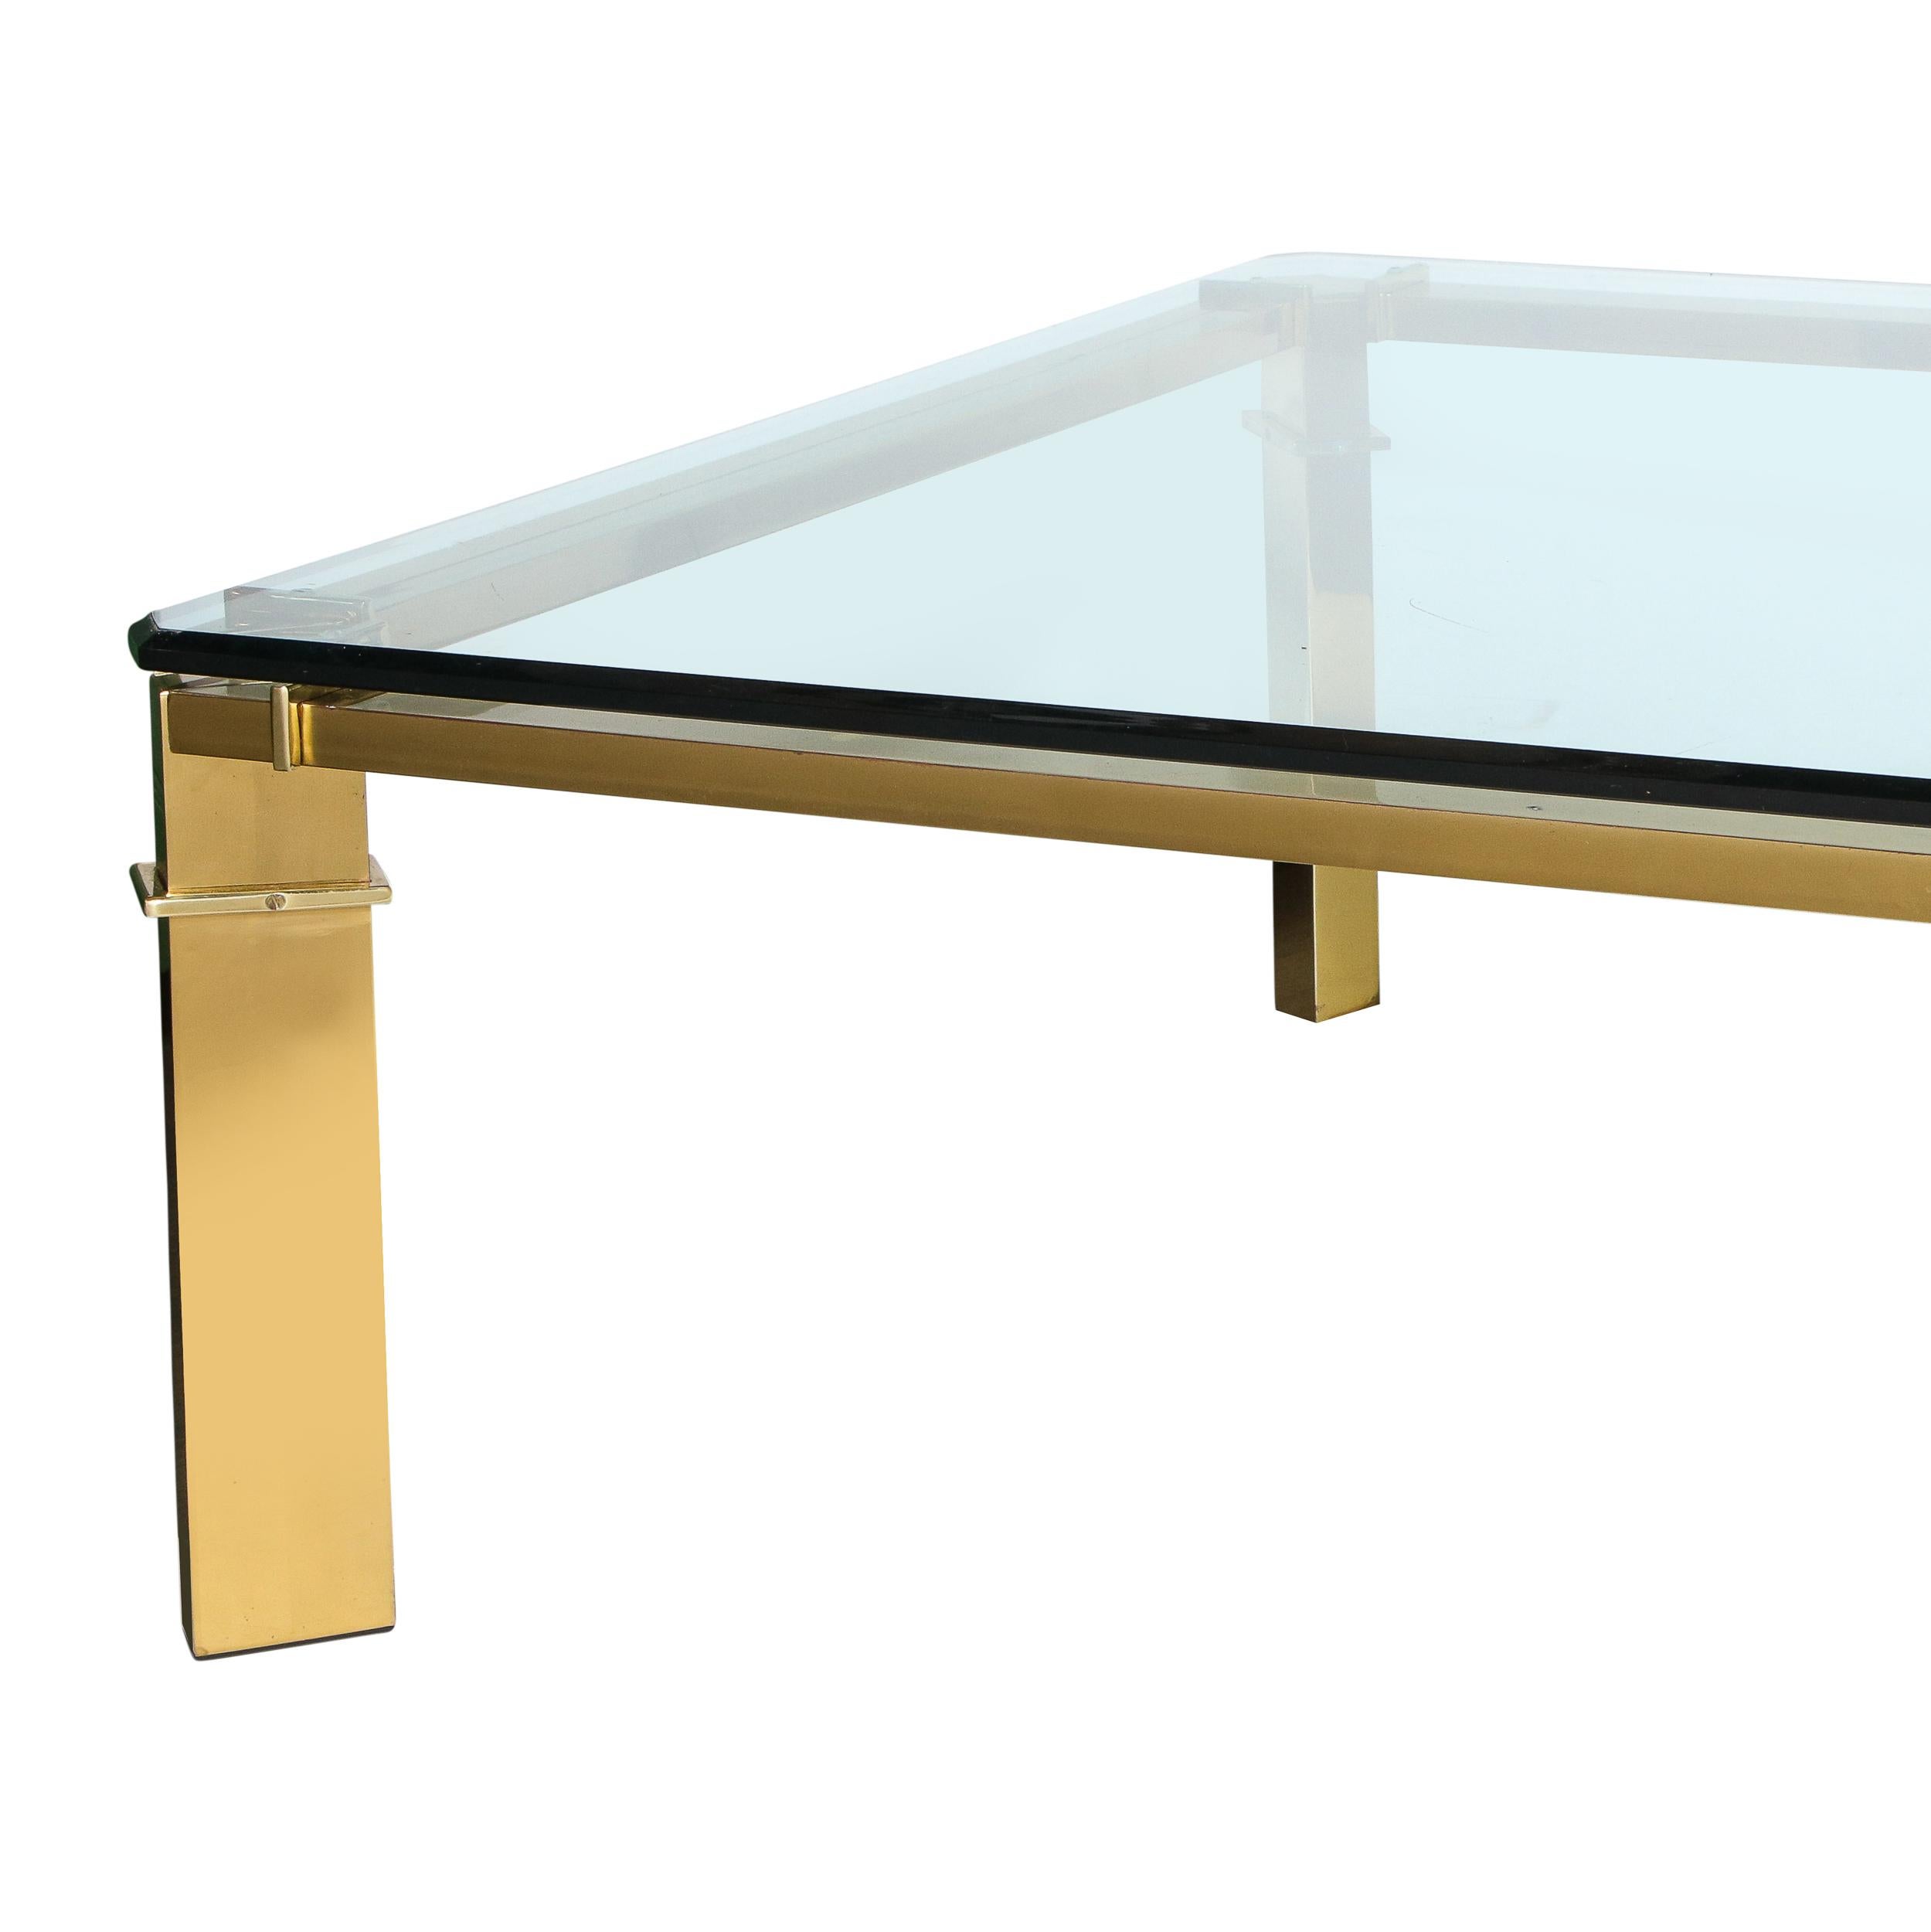 Late 20th Century Mid-Century Modern Geometric Rectilinear Polished Brass & Glass Cocktail Table